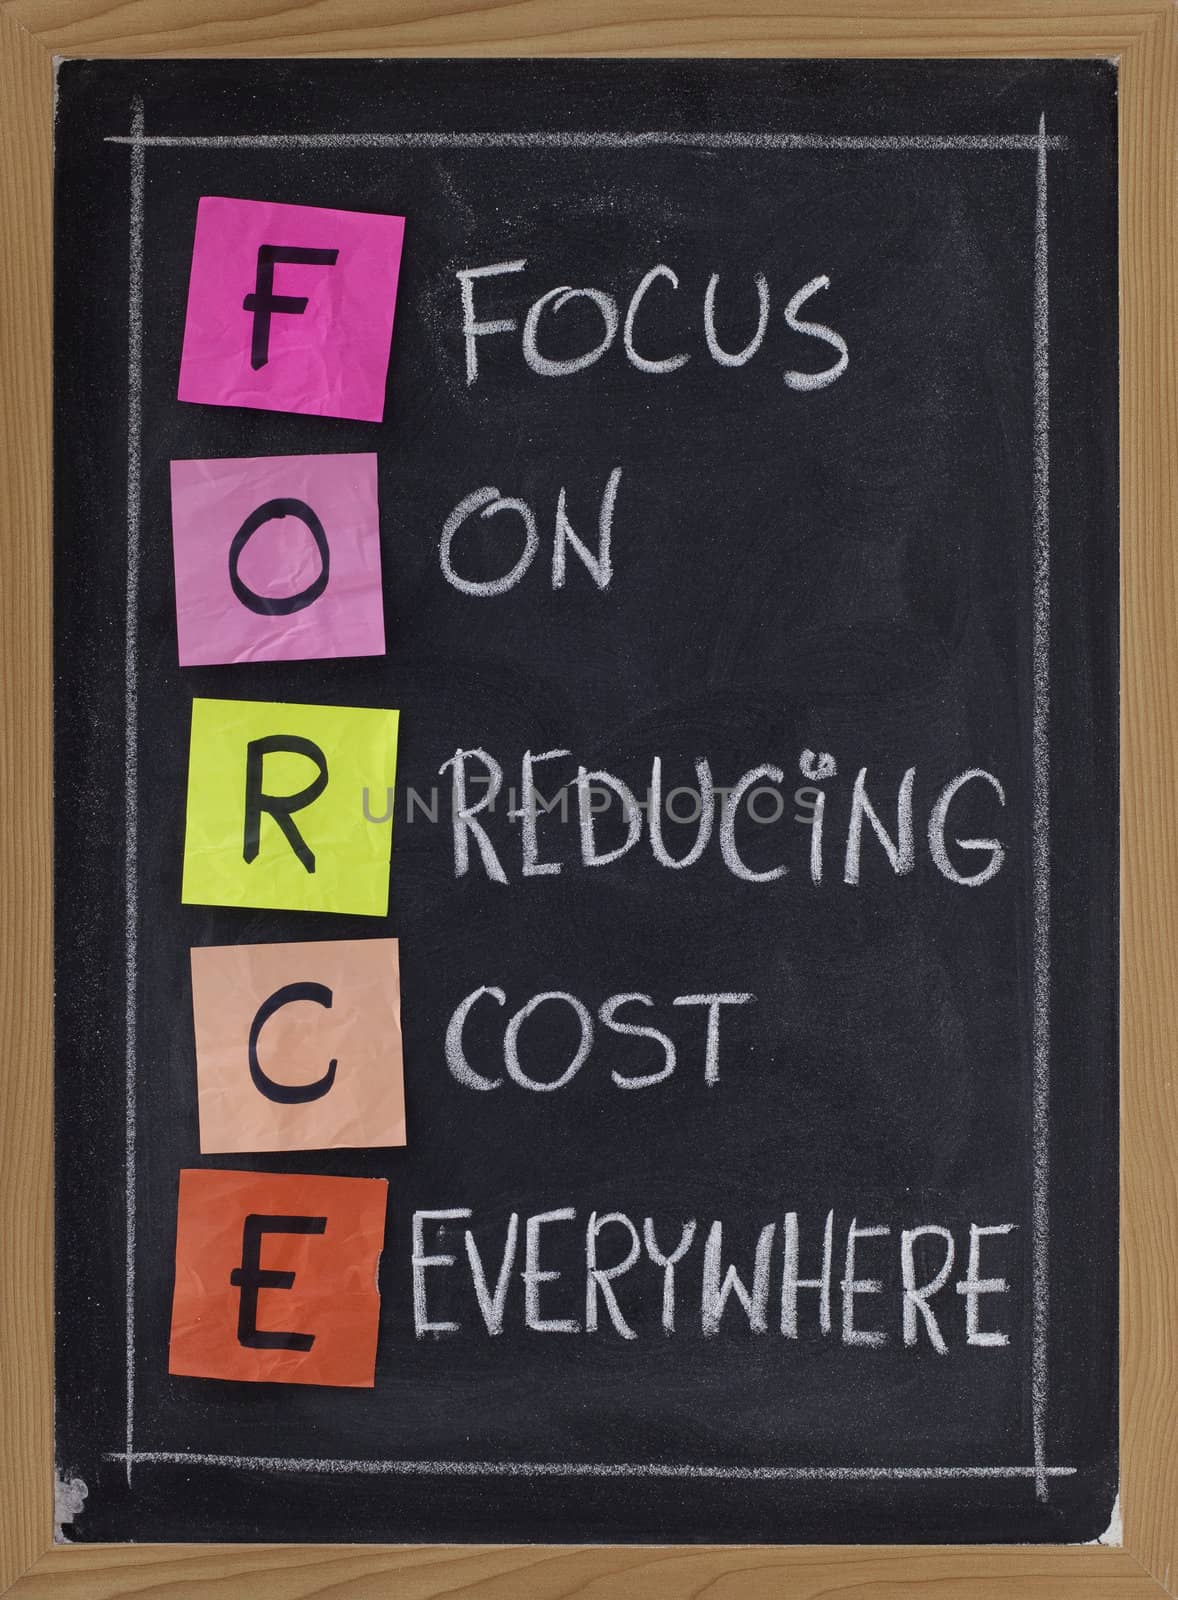 focus on reducing cost everywhere by PixelsAway